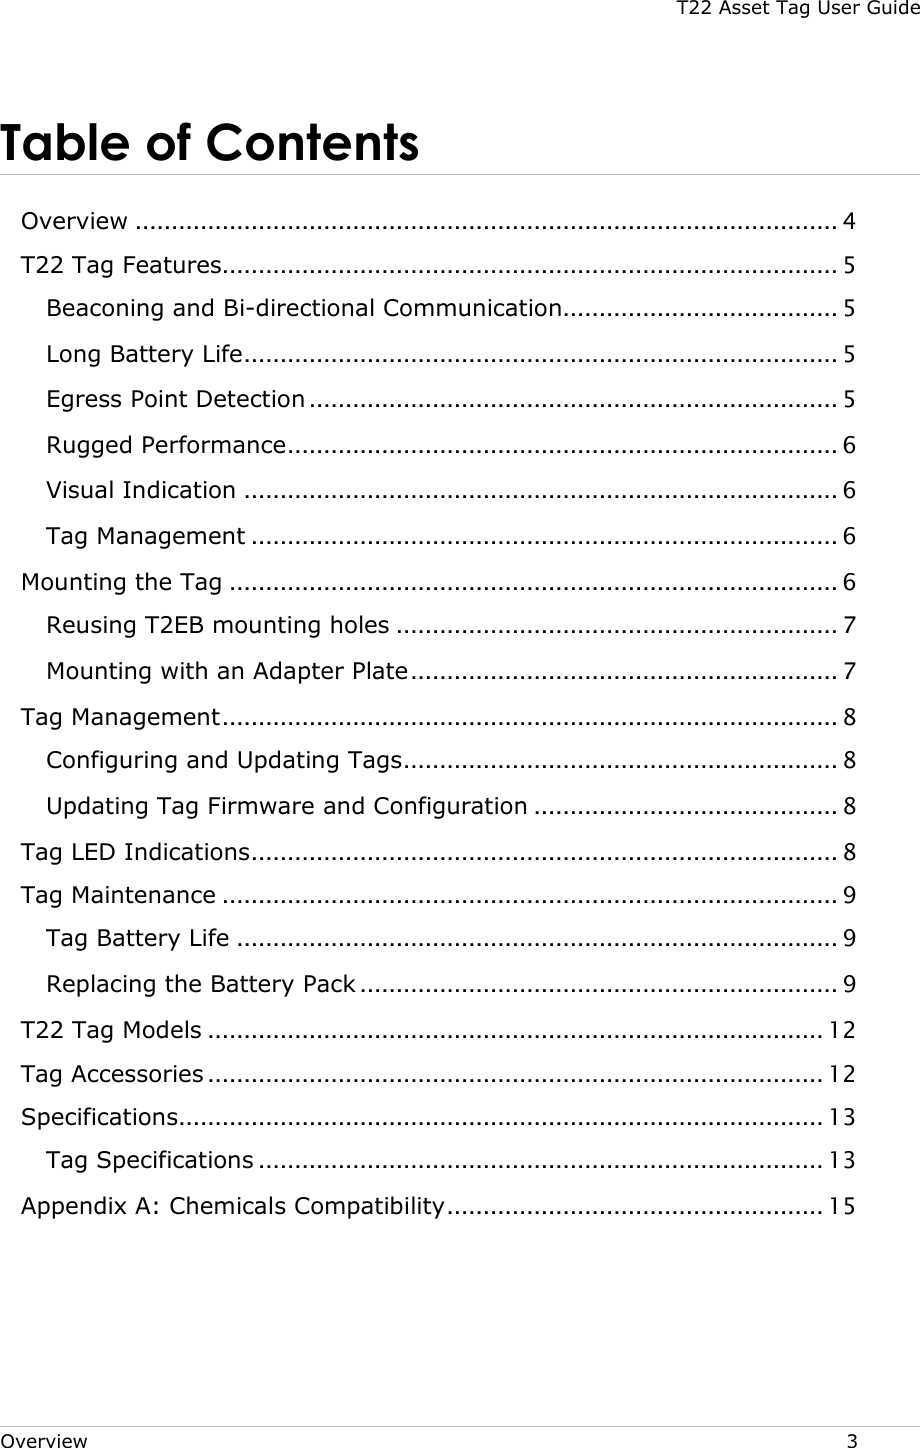 T22 Asset Tag User Guide Overview  3 Table of Contents  Overview ................................................................................................. 4 T22 Tag Features..................................................................................... 5 Beaconing and Bi-directional Communication...................................... 5 Long Battery Life .................................................................................. 5 Egress Point Detection ......................................................................... 5 Rugged Performance ............................................................................ 6 Visual Indication .................................................................................. 6 Tag Management ................................................................................. 6 Mounting the Tag .................................................................................... 6 Reusing T2EB mounting holes ............................................................. 7 Mounting with an Adapter Plate ........................................................... 7 Tag Management ..................................................................................... 8 Configuring and Updating Tags ............................................................ 8 Updating Tag Firmware and Configuration .......................................... 8 Tag LED Indications ................................................................................. 8 Tag Maintenance ..................................................................................... 9 Tag Battery Life ................................................................................... 9 Replacing the Battery Pack .................................................................. 9 T22 Tag Models ..................................................................................... 12 Tag Accessories ..................................................................................... 12 Specifications......................................................................................... 13 Tag Specifications .............................................................................. 13 Appendix A: Chemicals Compatibility .................................................... 15     